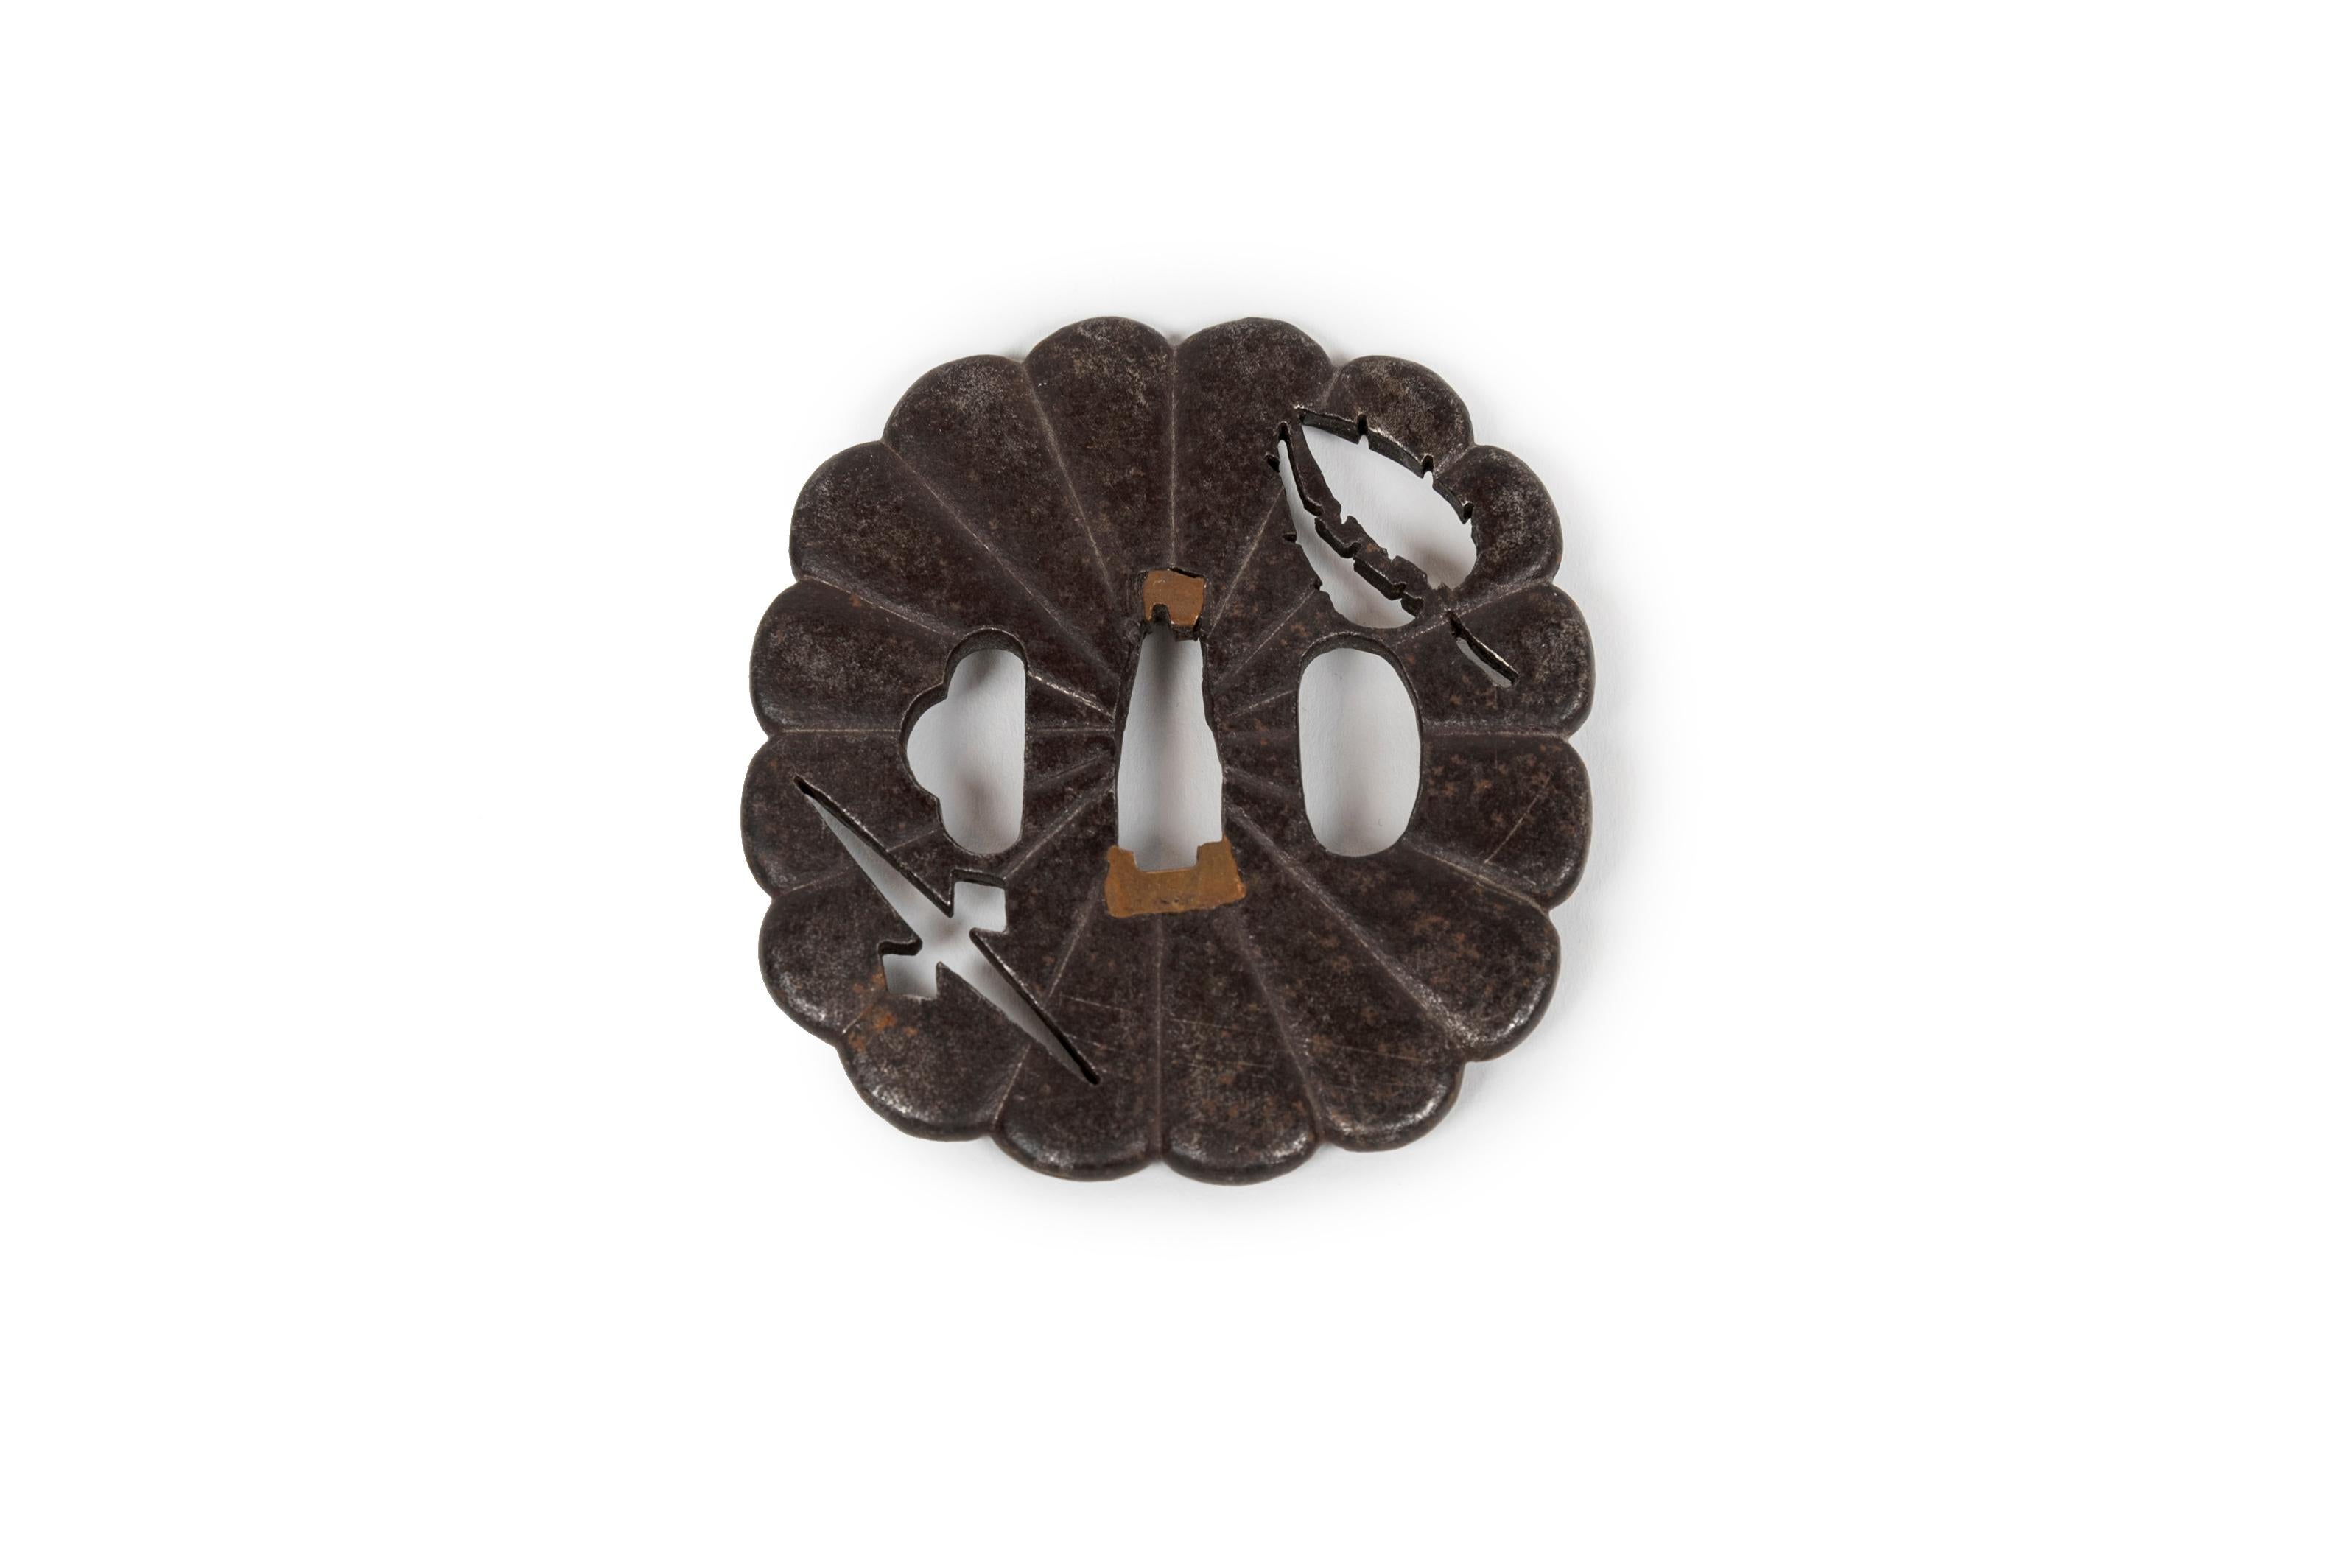 Iron tsuba in the shape of a chrysanthemum (kikugata), openworked in negative with foliage and geometric patterns.

Chrysanthemum shaped tsuba were quite popular in the Edo period as the flower was considered a symbol of nobility and elegance.